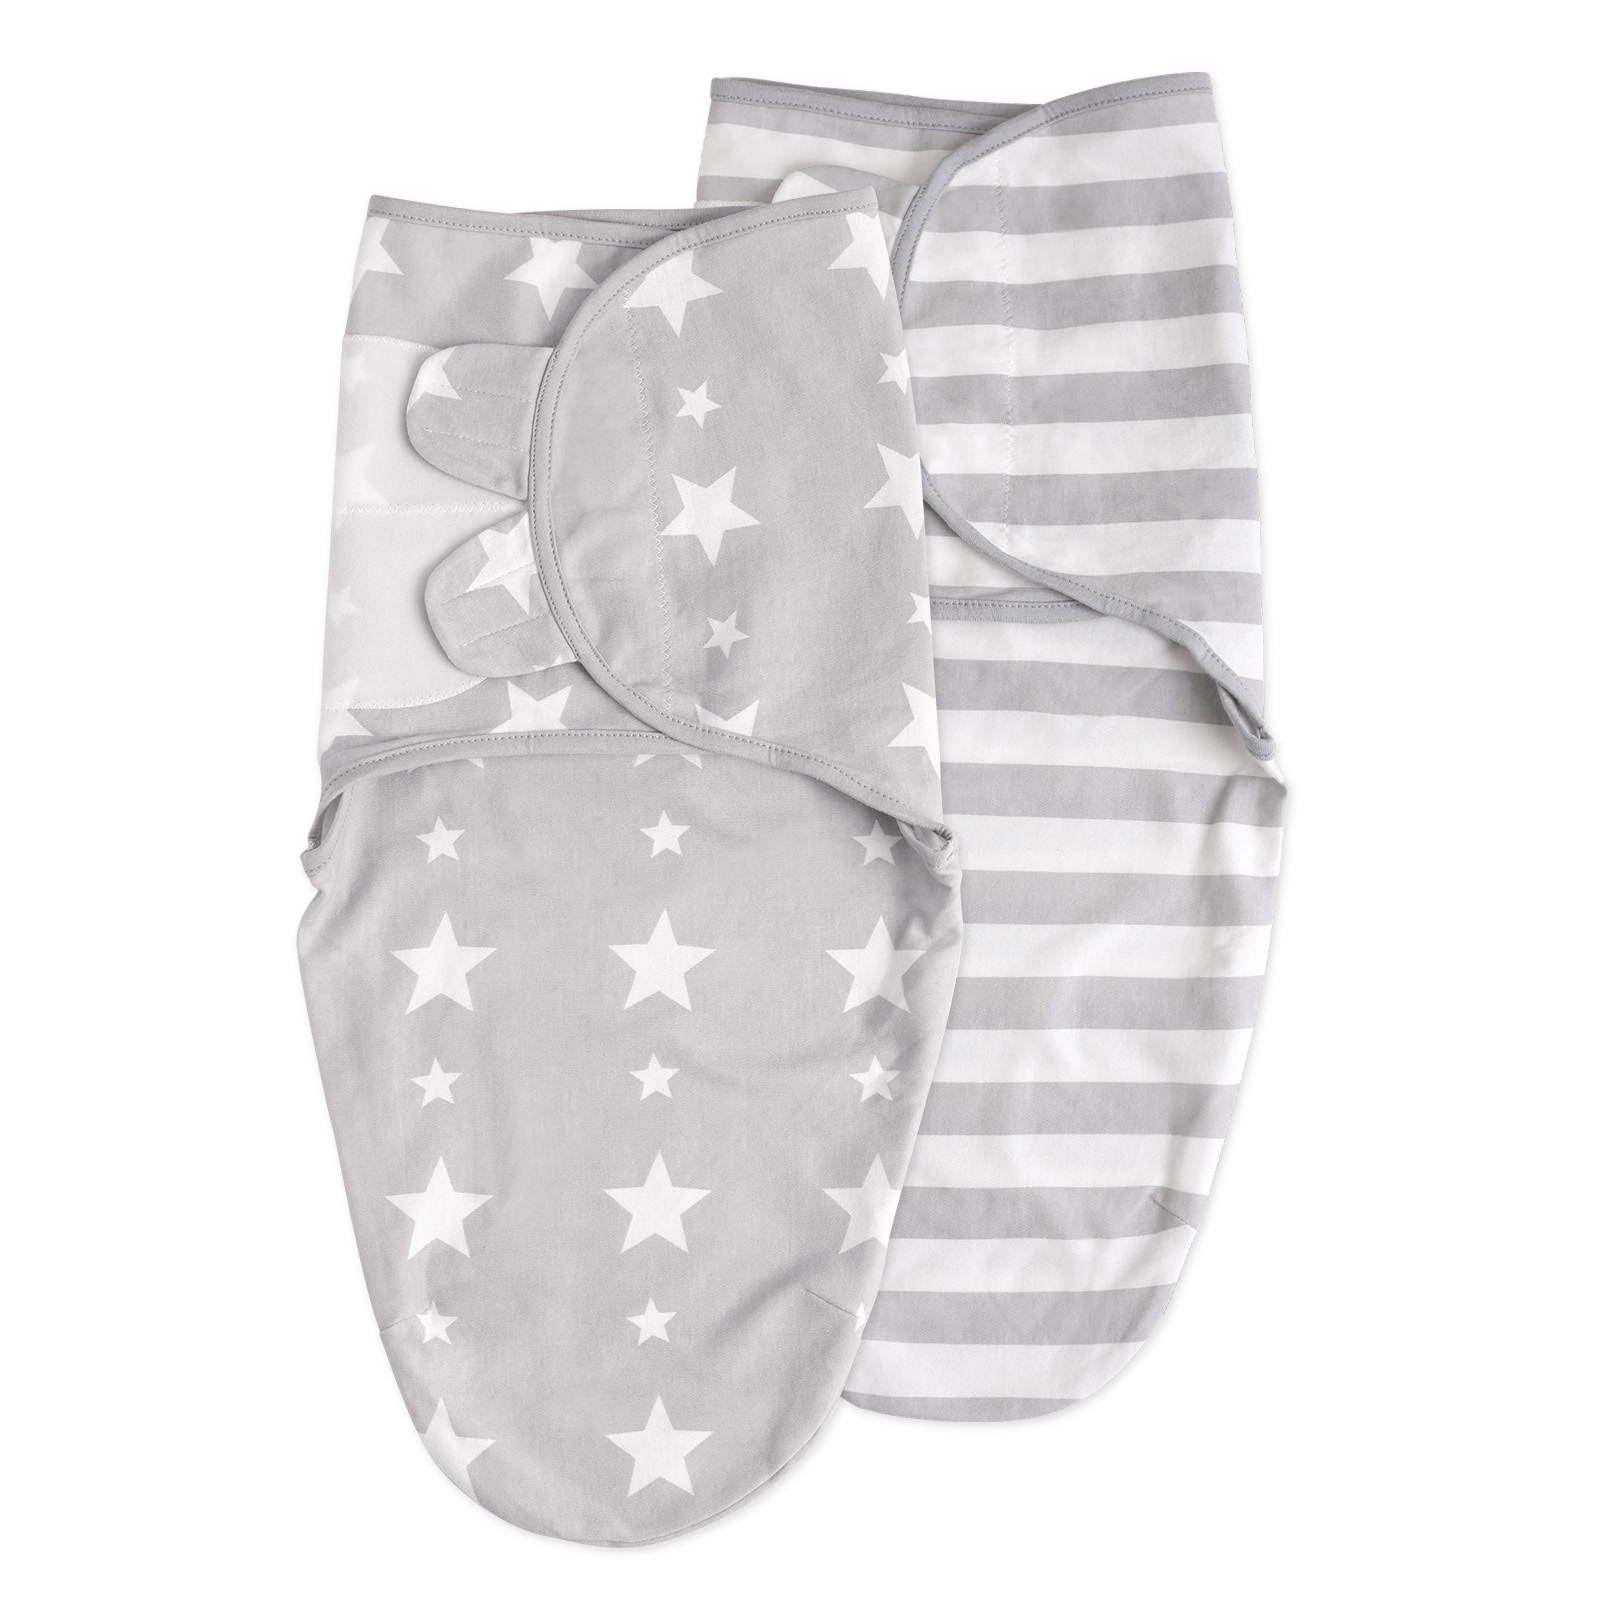 Stripe | Soarwg Baby Swaddle 0-3 Months 2-Pack